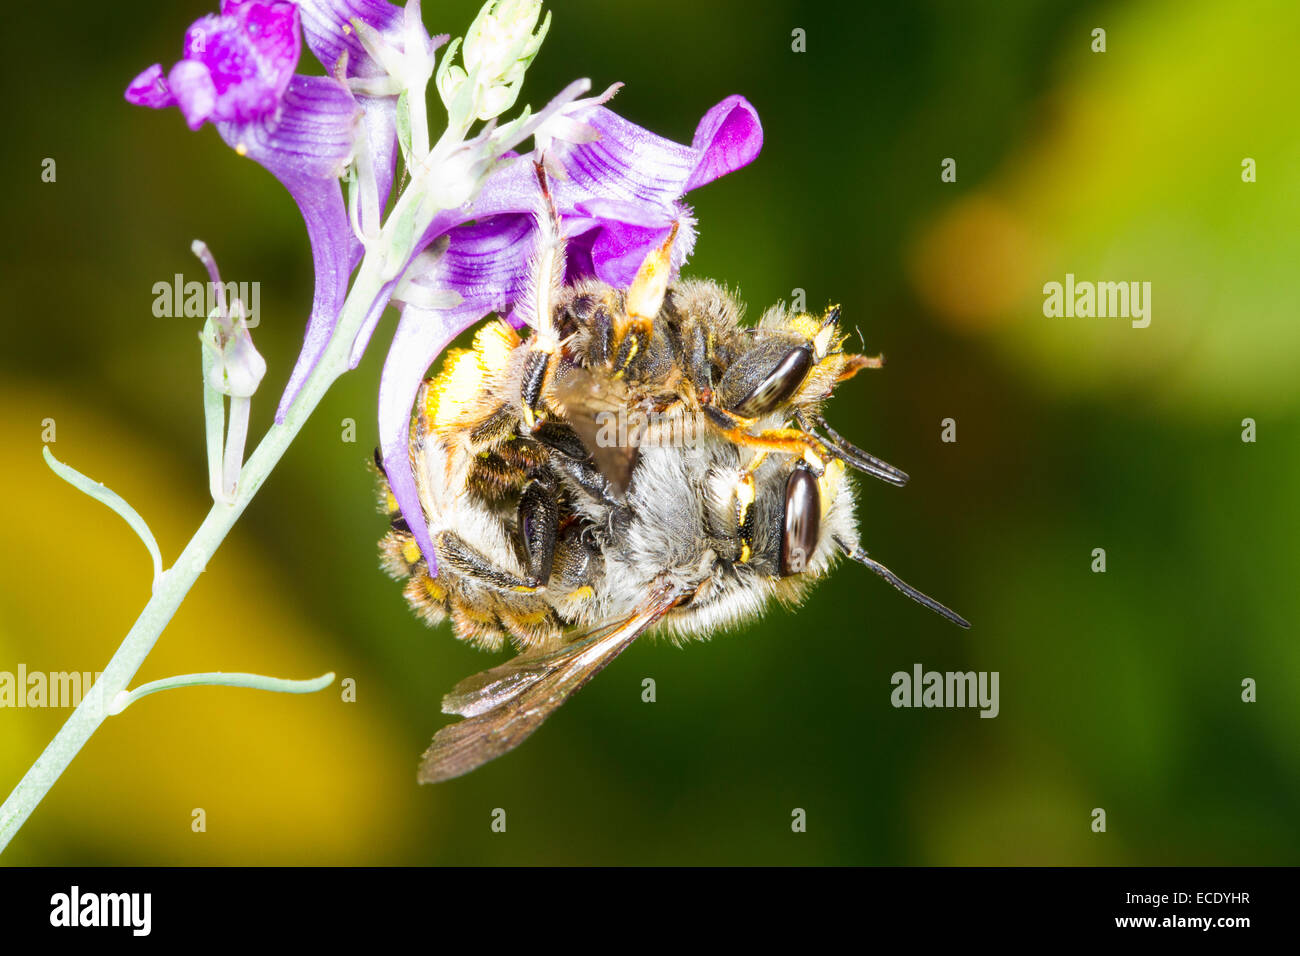 Wool Carder Bees (Anthidium manicatum) pair mating on a Purple Toadflax (Linaria purpurea) flower in a garden. Seaford, Sussex. Stock Photo